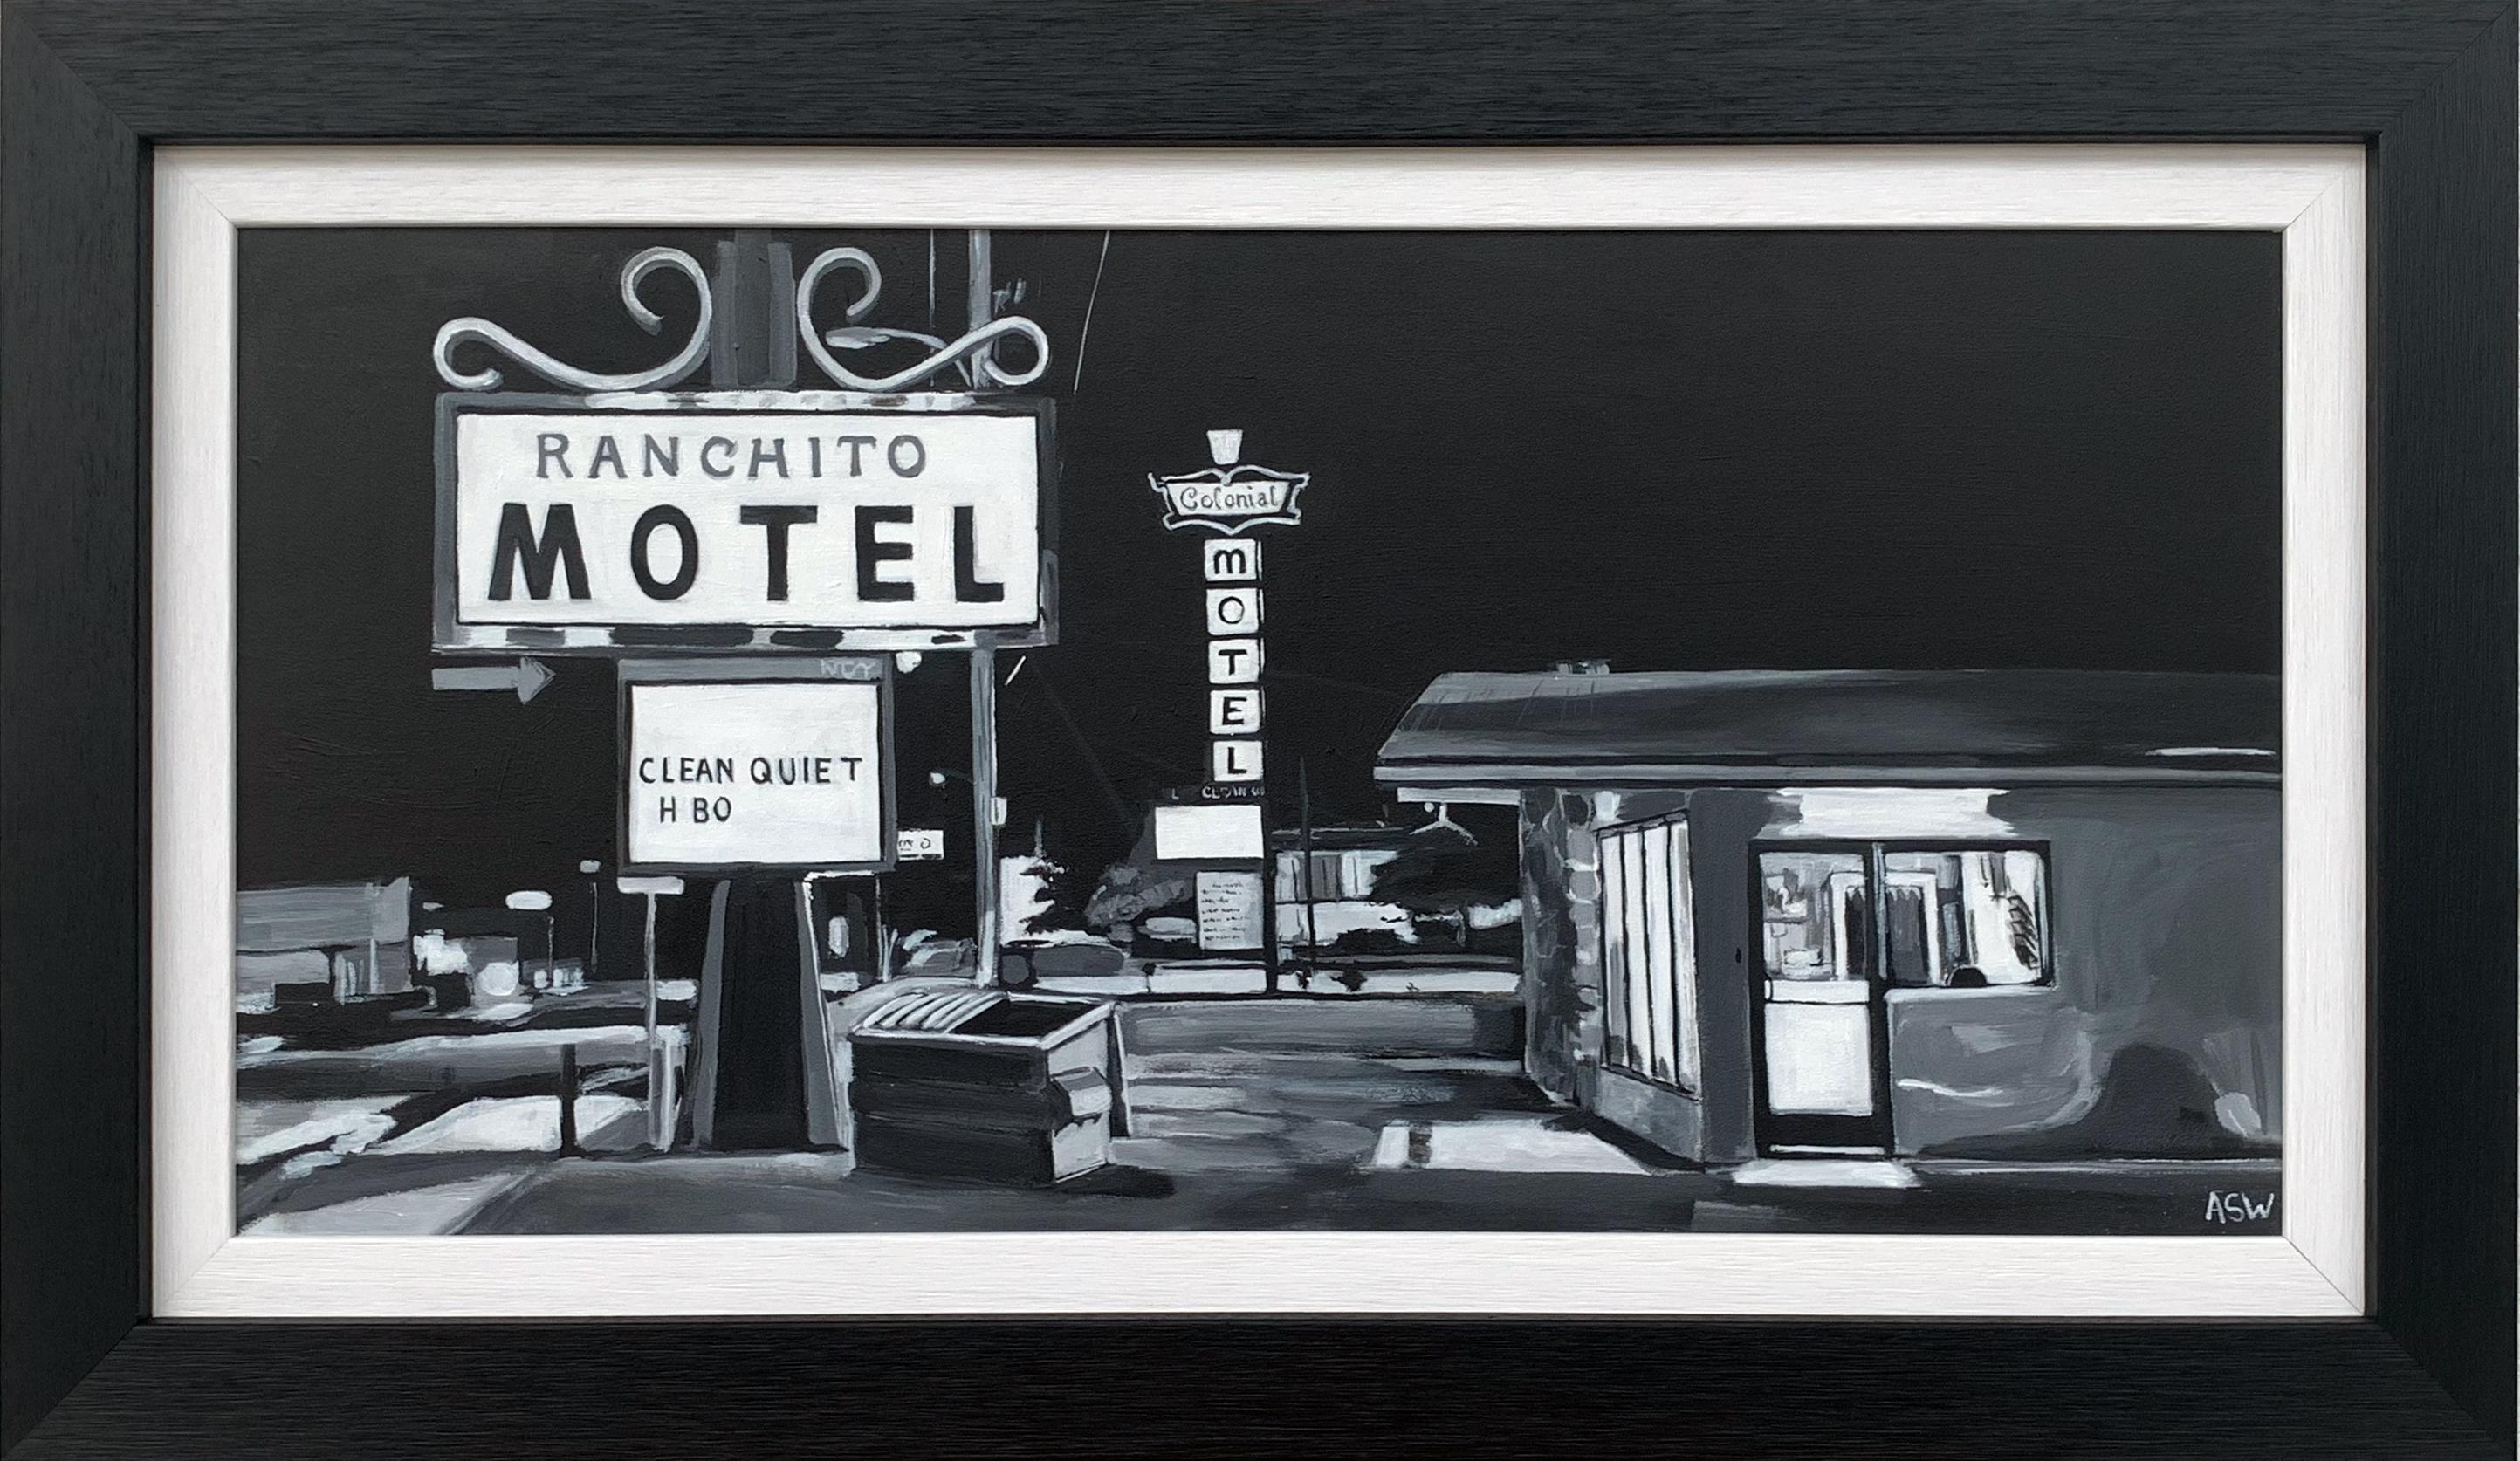 Black & White Americana Painting of Ranchito Motel on Route 66 New Mexico USA